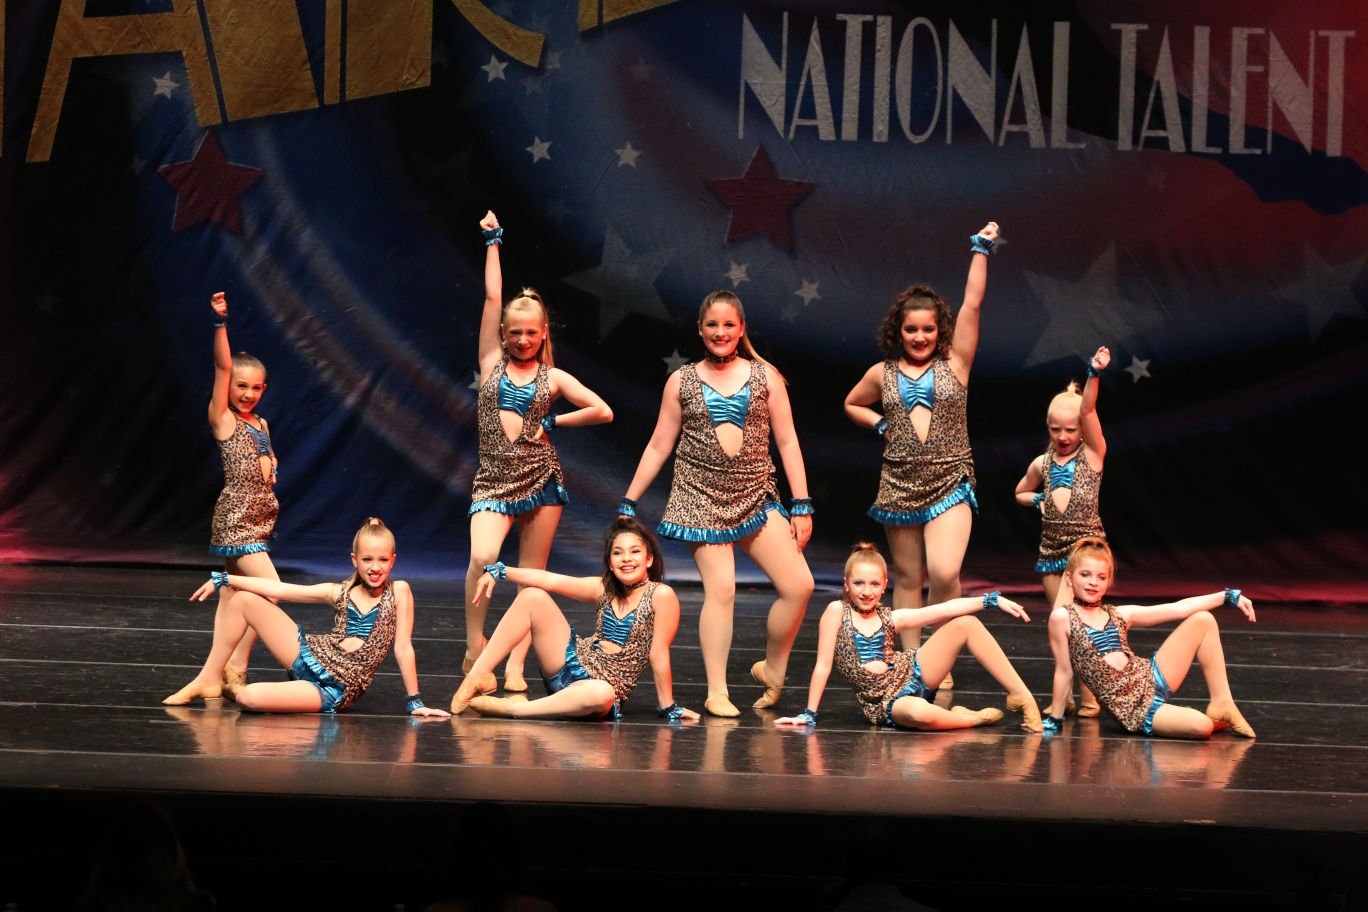 starbound dance competition